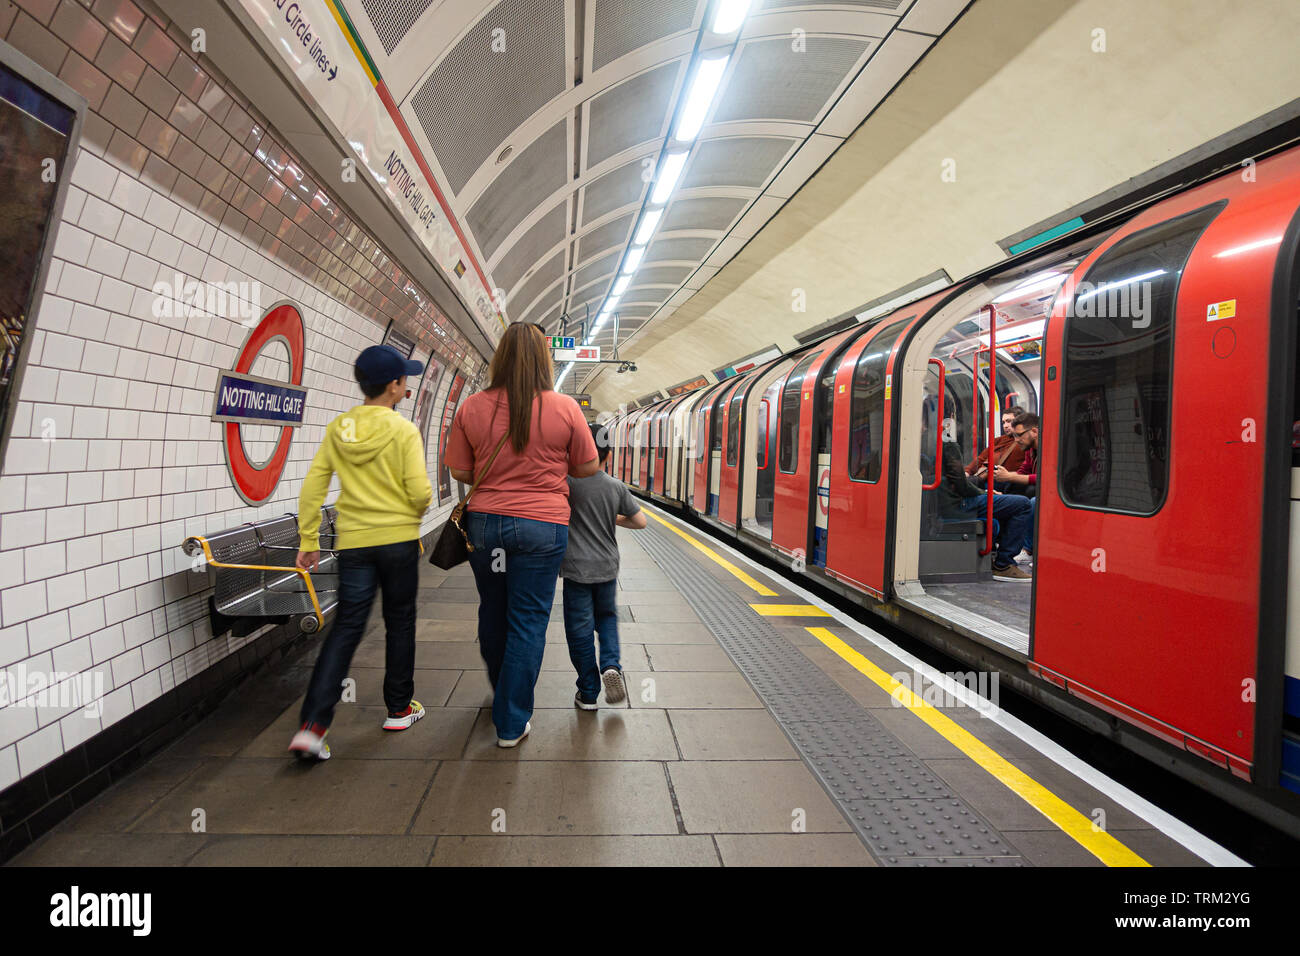 A mother and her son walk down the platform at Notting Hill Gate London Underground platform having arrived on a train. Stock Photo